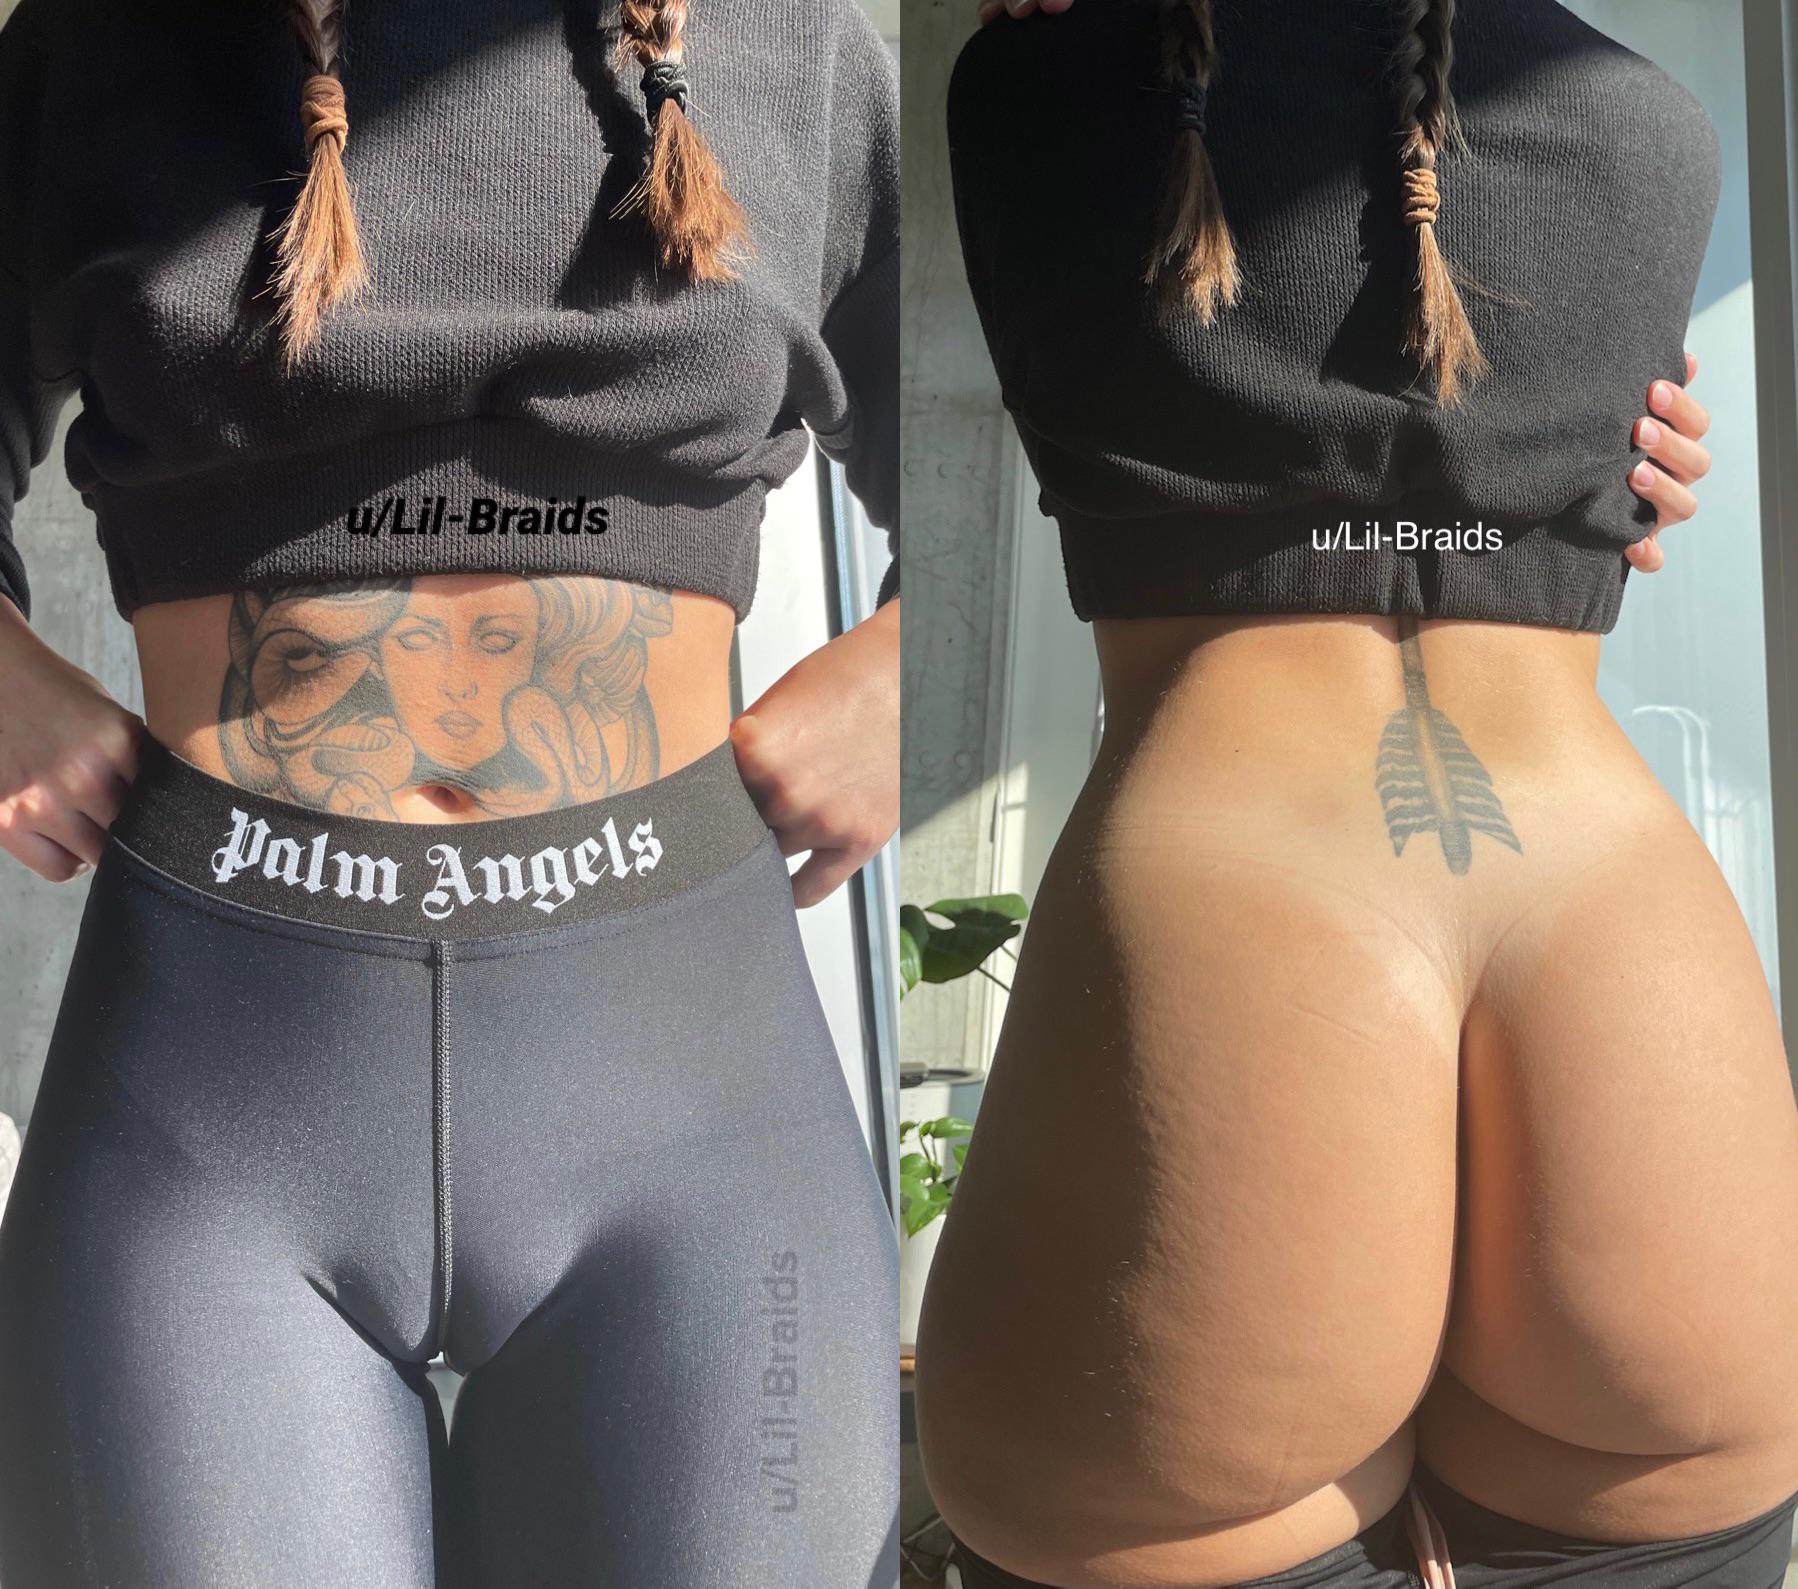 PAWG Having a phat ass comes with having a phat